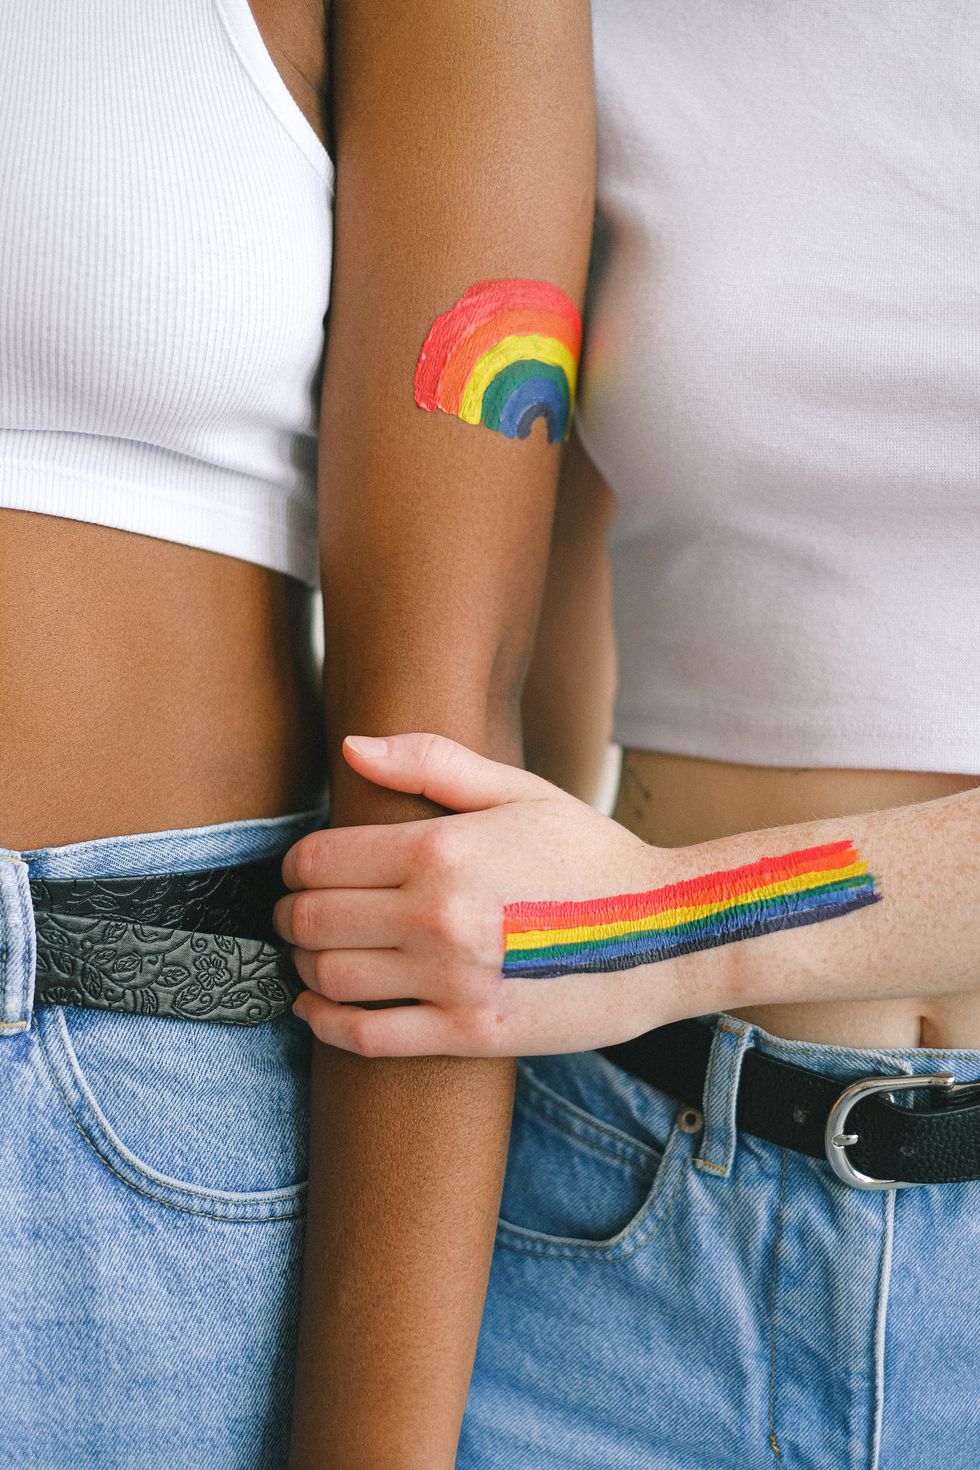 two people with gay pride body paint holding each other